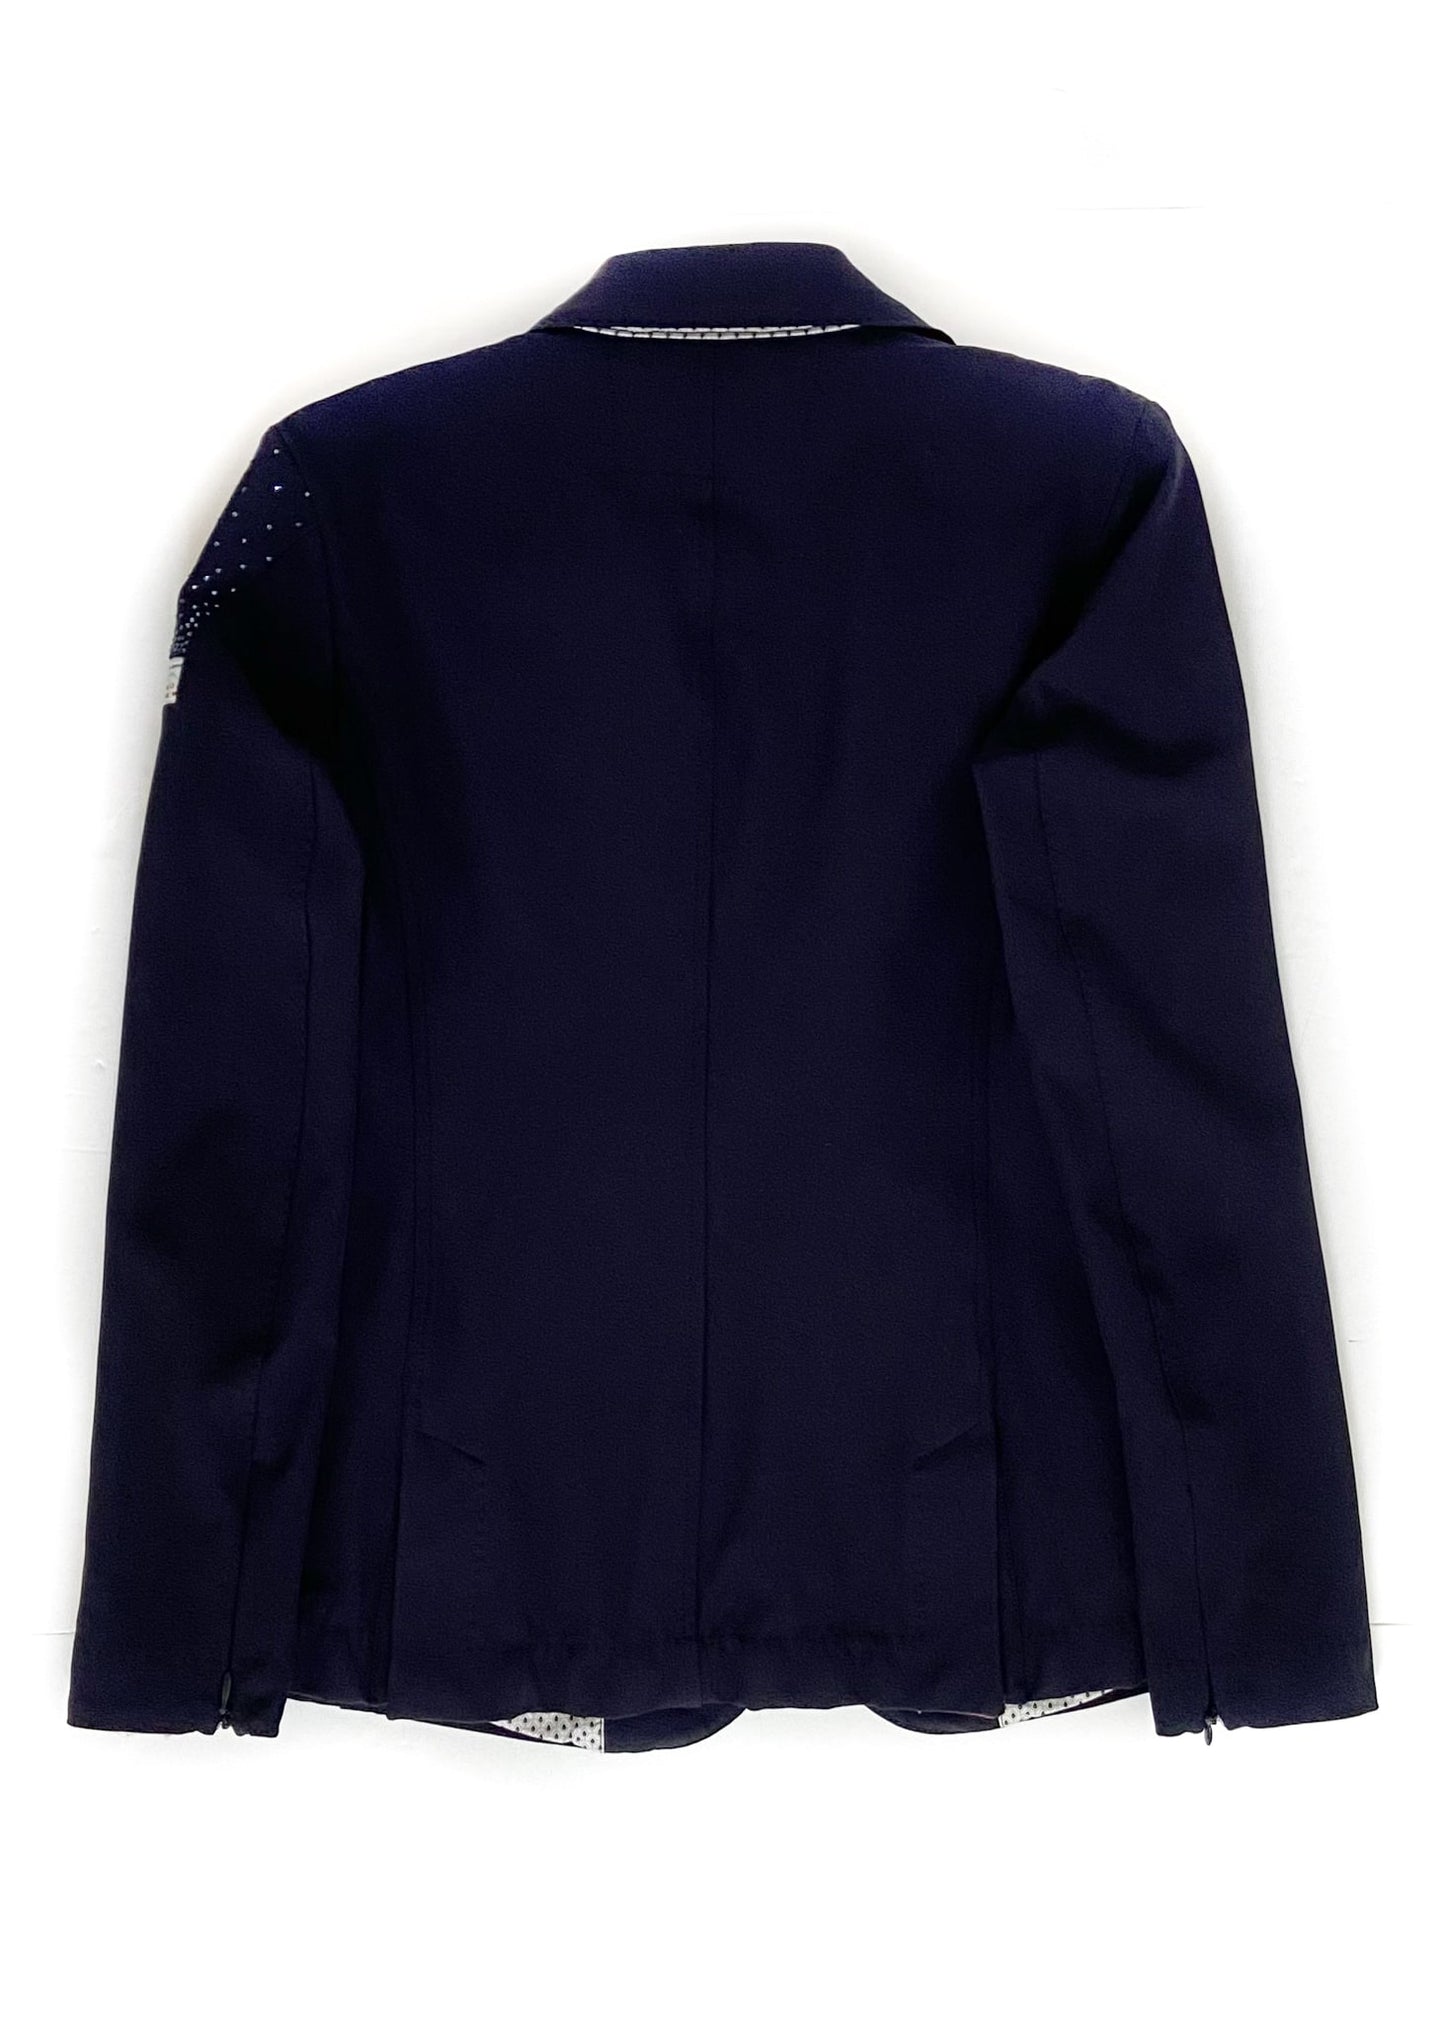 Animo Competition Jacket - Navy - Women's 4